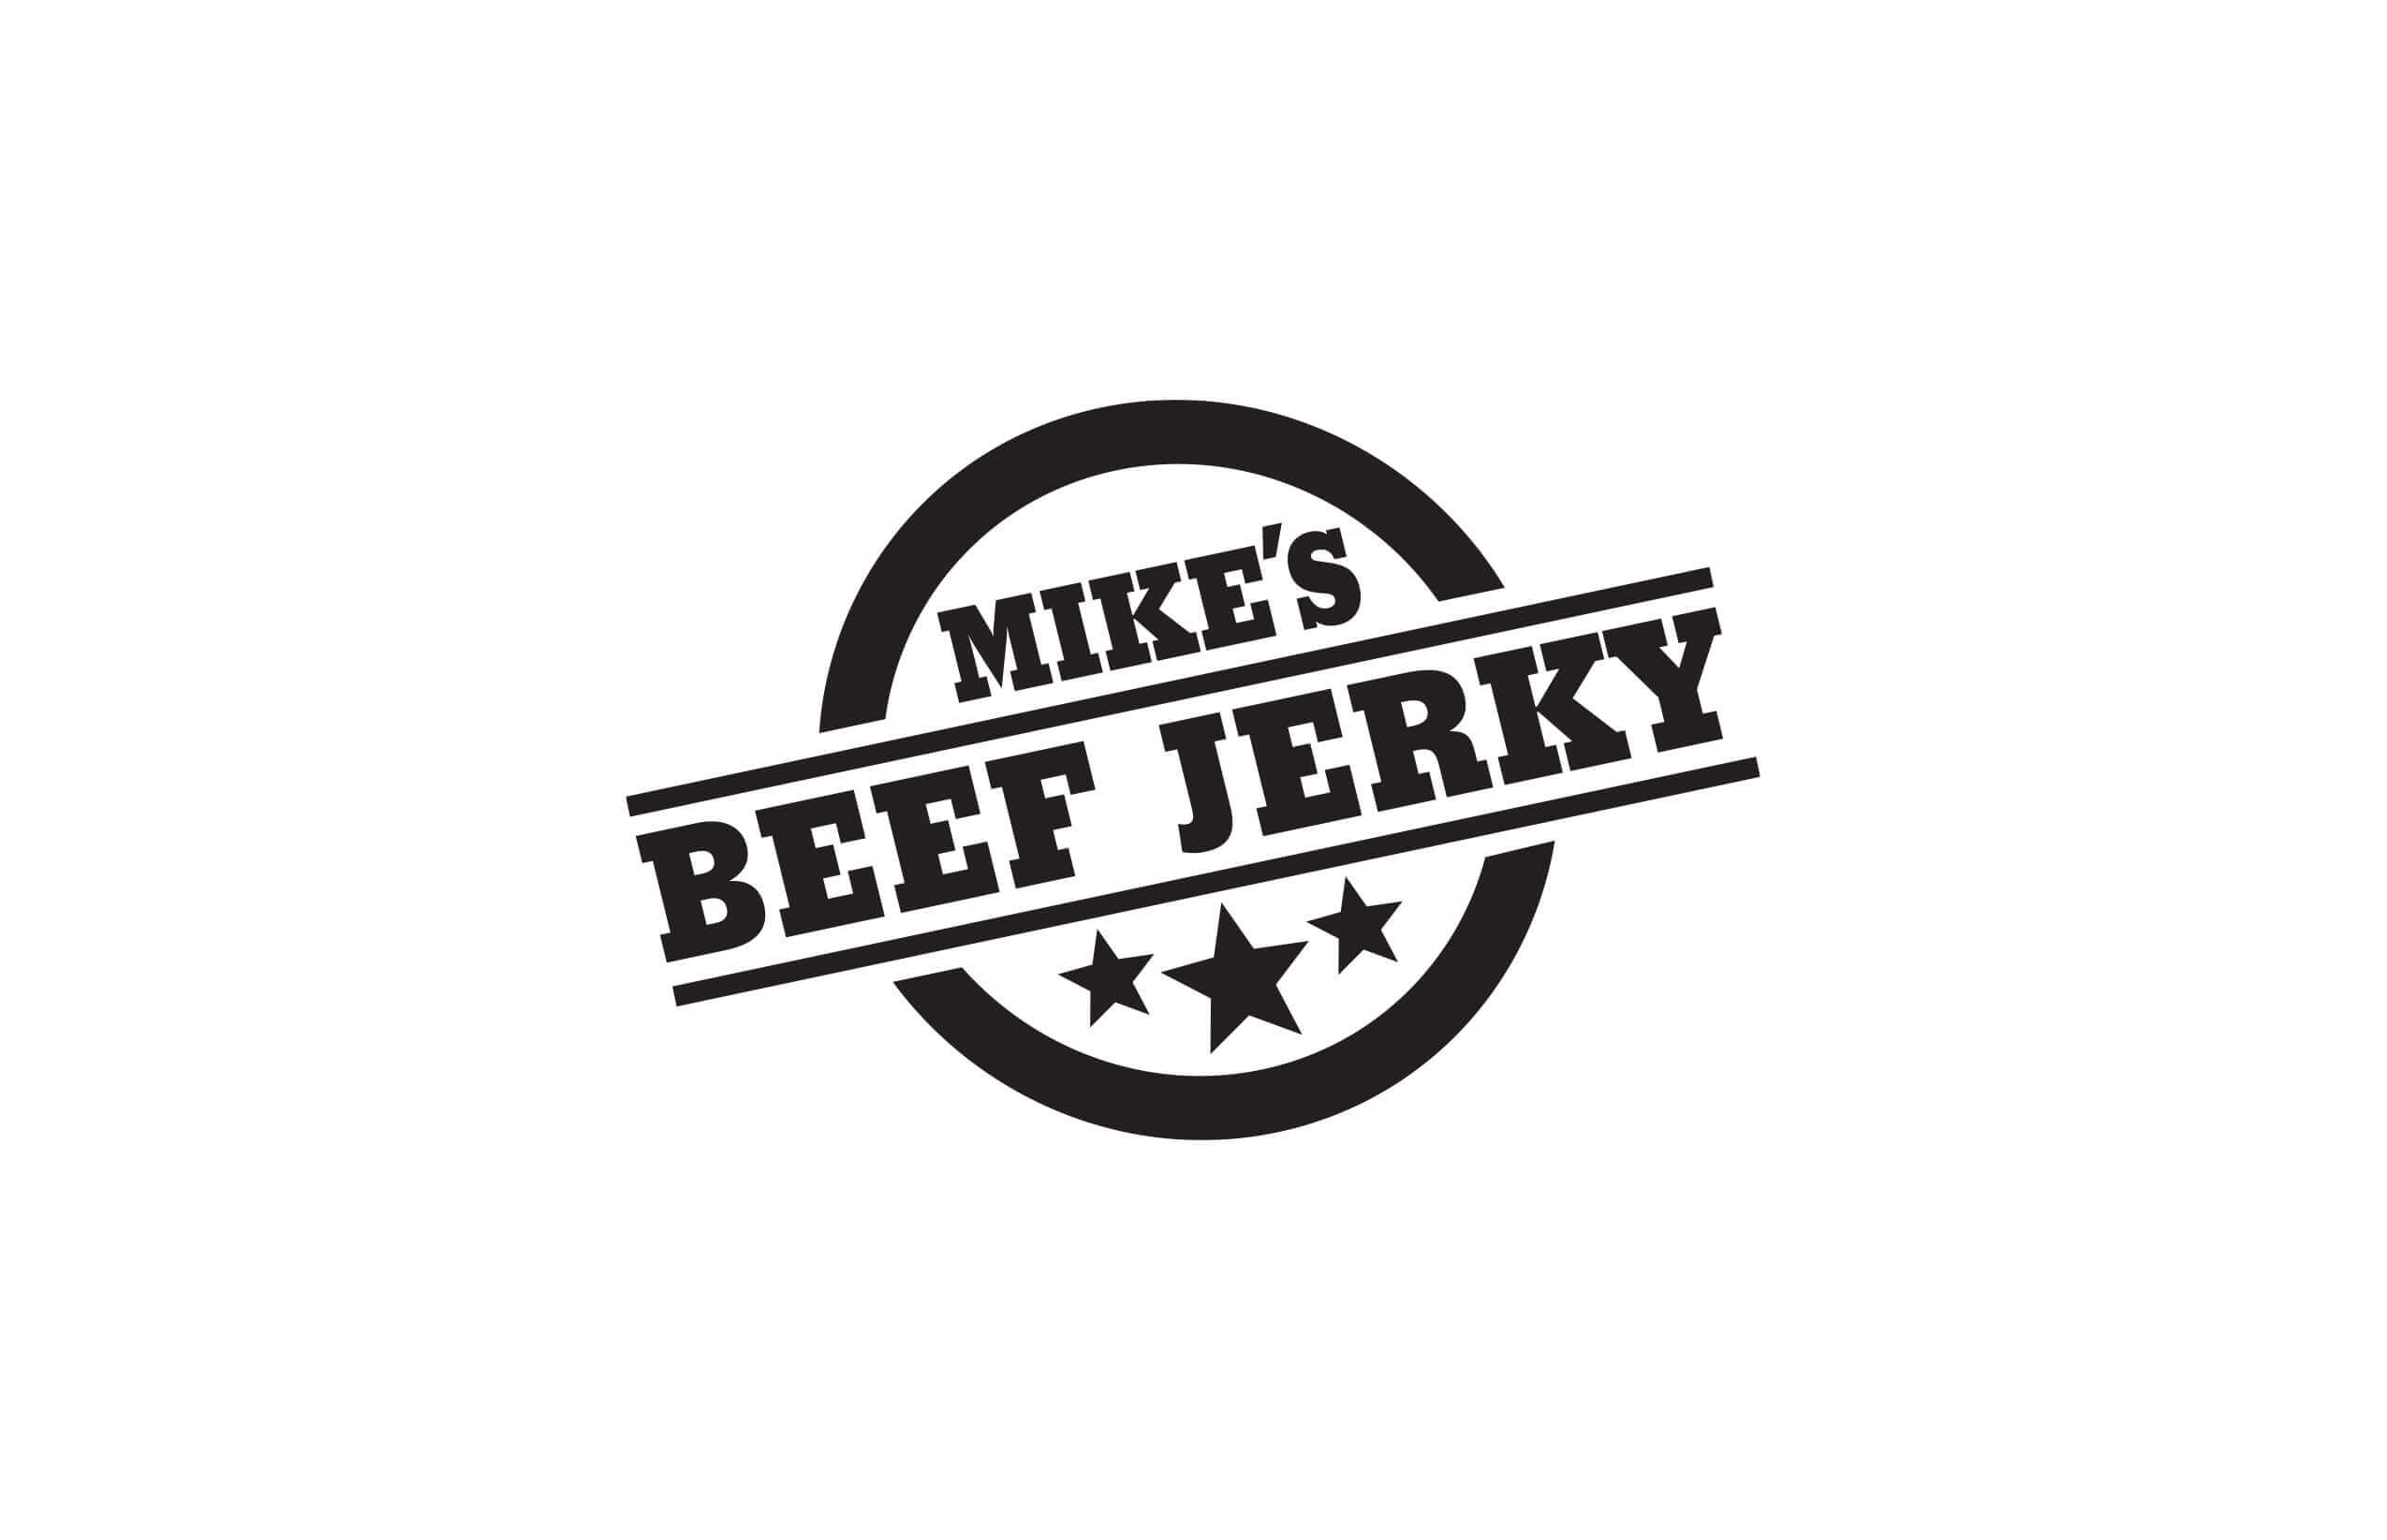 Icon Graphic Design Adelaide image of Mike's Beef Jerky black and white logo.